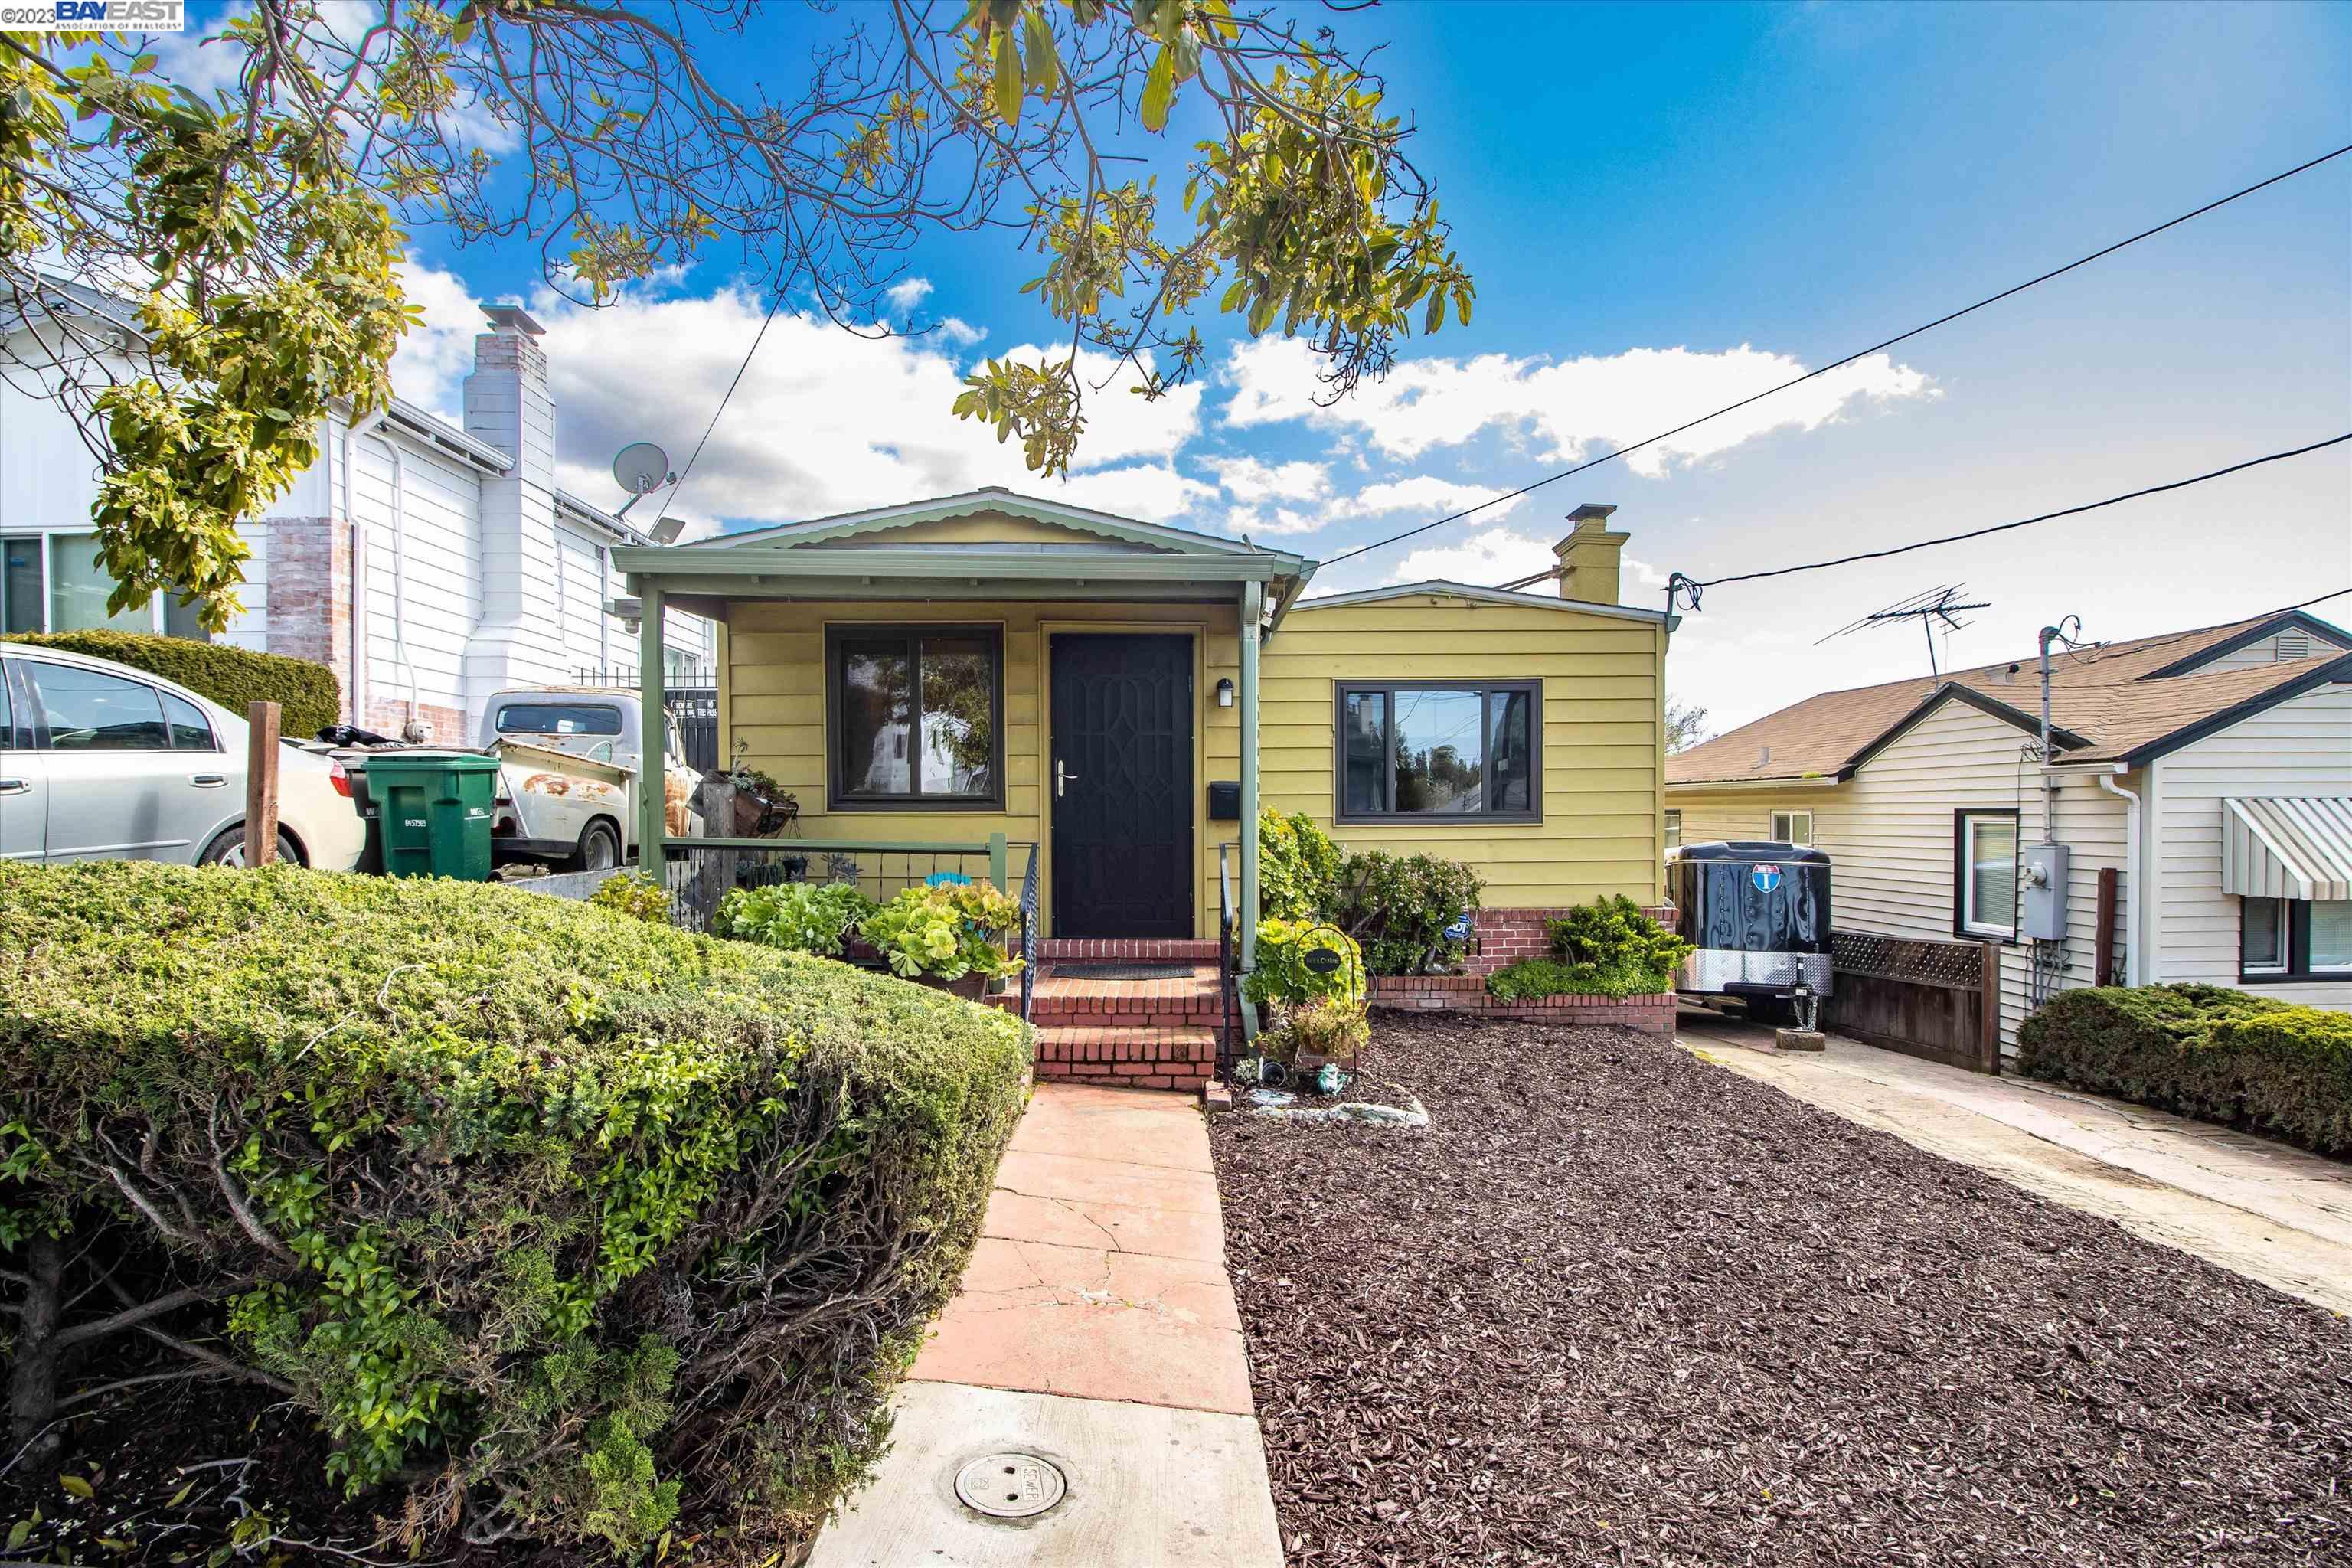 (OPEN HOUSE SAT AND SUN 1-4) Fantastic Opportunity in Chabot Park Nestled in the Foothills of Oakland. This Charming home has amazing an amazing character and you will be impressed by the spacious layout it has to offer. The Remodeled Kitchen boasts an open and airy feel with Ample Natural Light, Partial Bay View, Oak Cabinets dressed in Concrete Counter Tops and complimented by Concrete Slab Floor. The kitchen and High-end Appliances are well lit by Recessed Lighting accenting the Coffered Ceiling. The Bathroom has been Remodeled and other Updates and features include top grade Dual Pane Windows, Custom Baseboard and Custom Fireplace, Fresh Paint, Original Hardwood Floors, Newer Roof, Copper Pipes, Replaced Plumbing including Sewer Lateral. Close to 580, 7 minutes to Oakland Zoo, 14 minutes to OAK Airport and Bart.